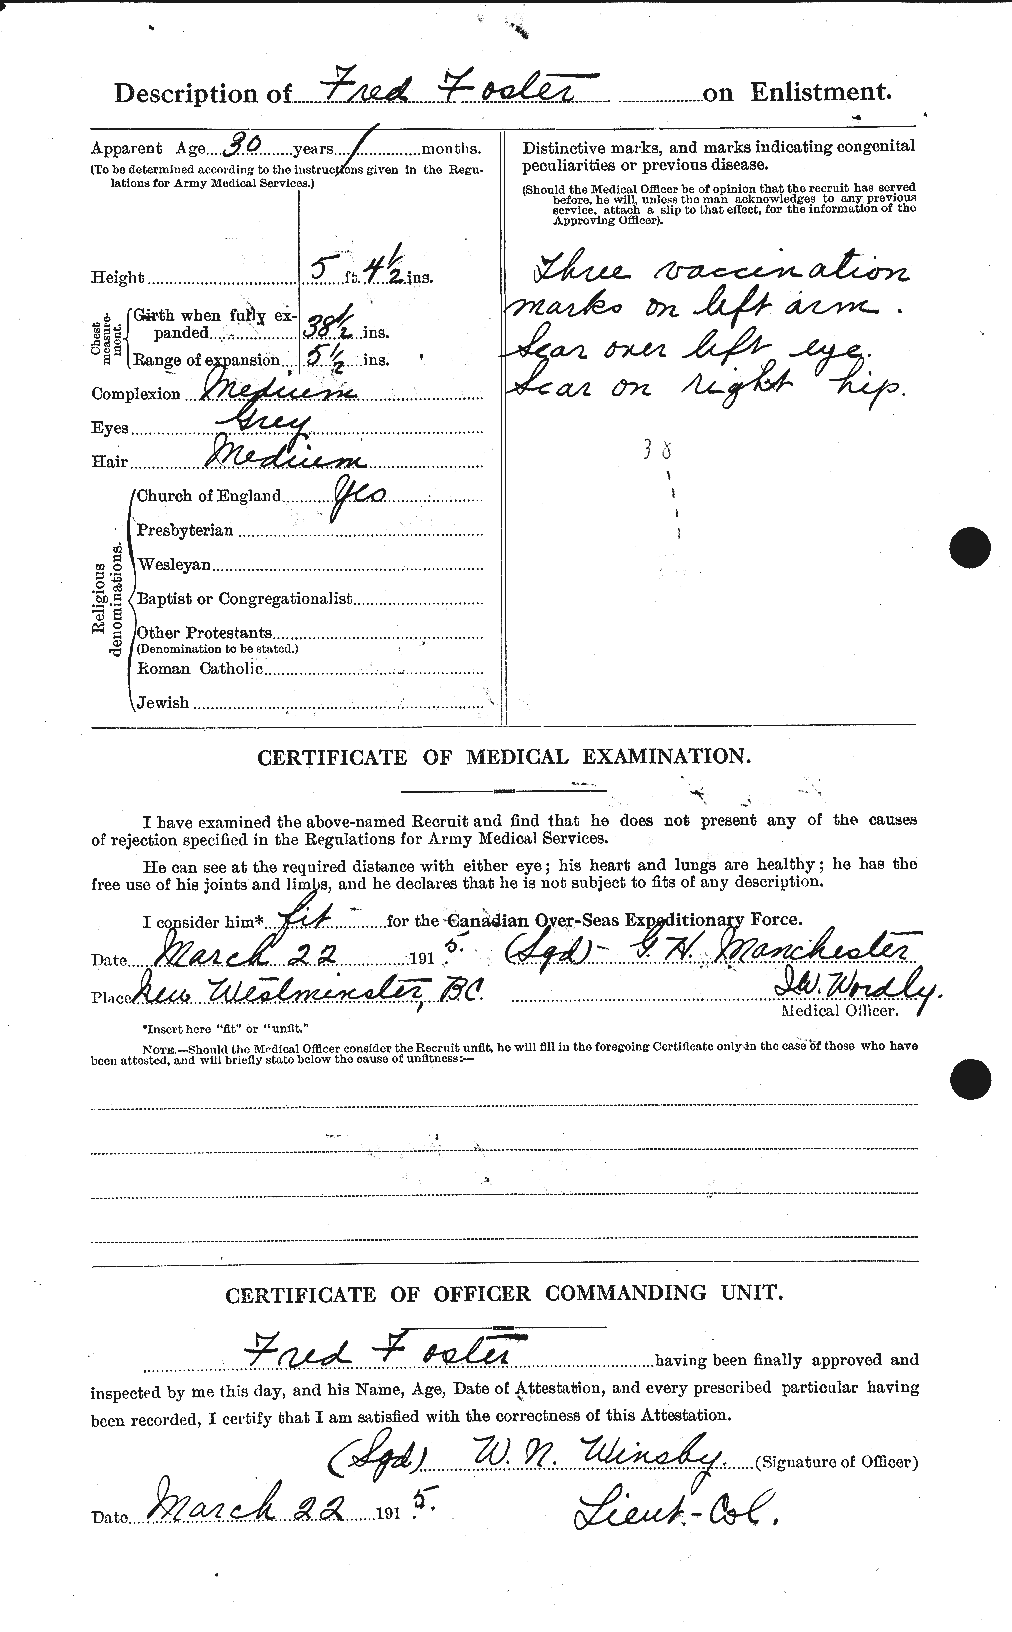 Personnel Records of the First World War - CEF 330634b